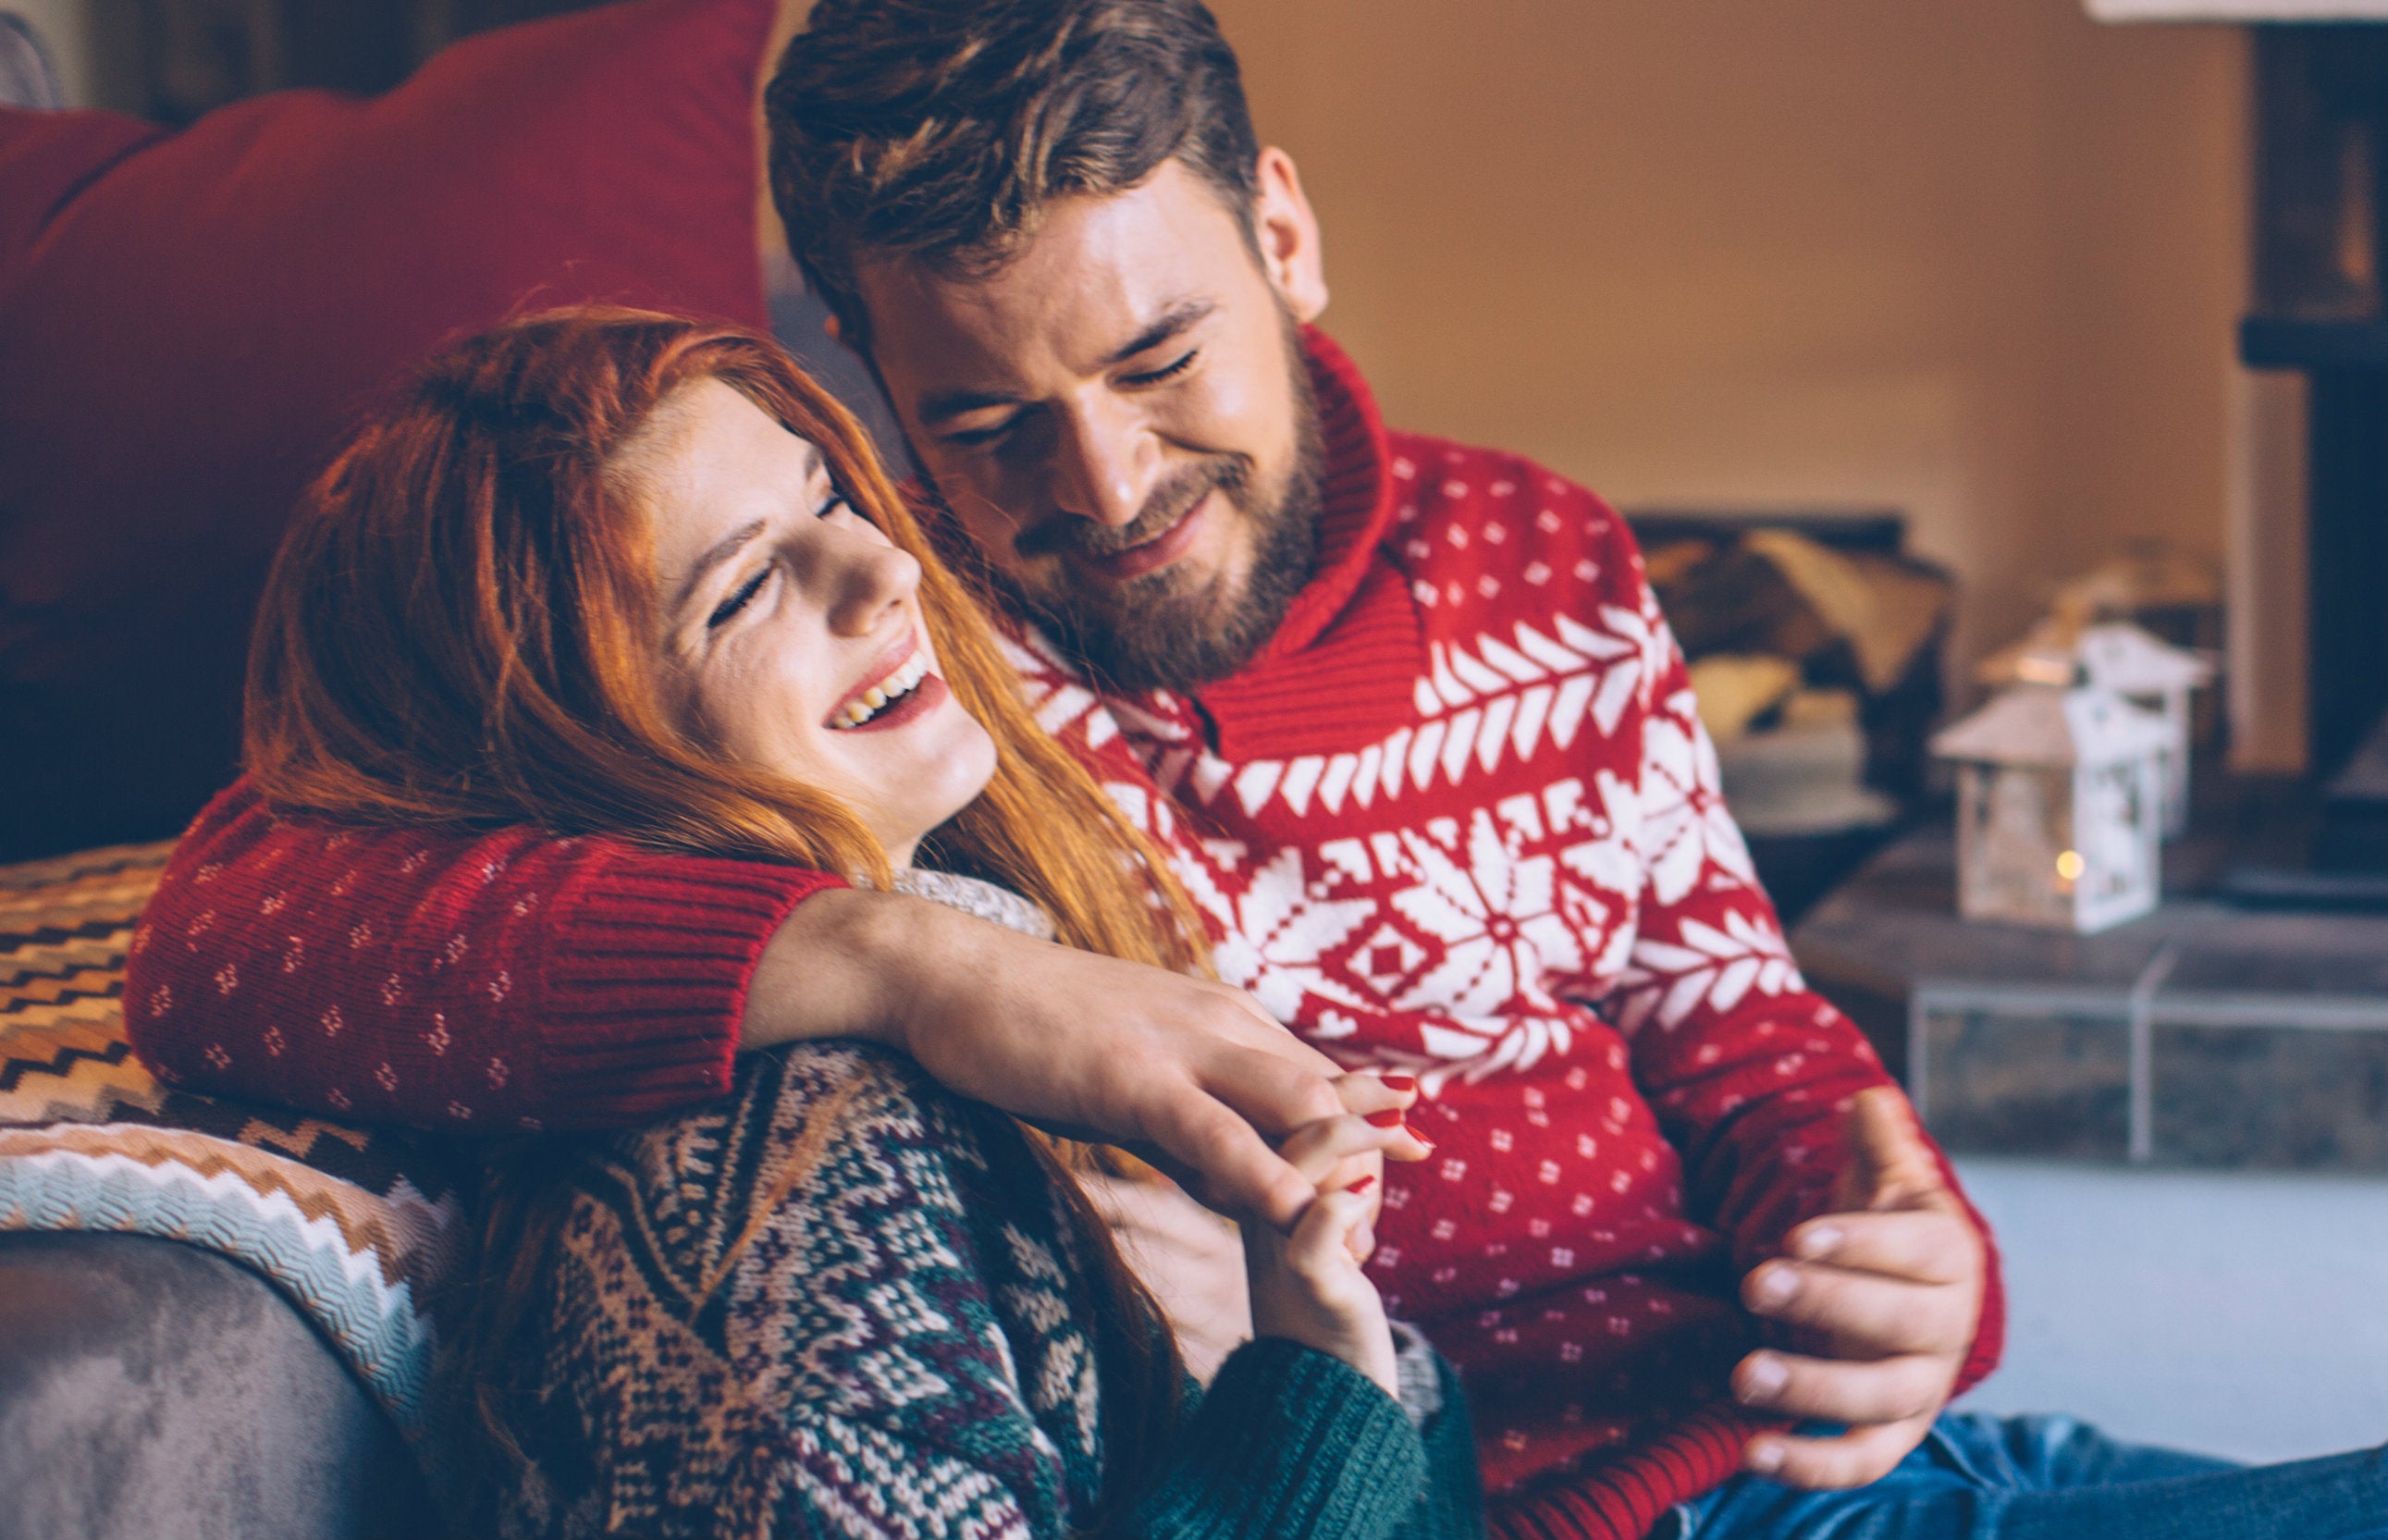 Here are three tips for how to talk to your spouse about money problems over the holidays.